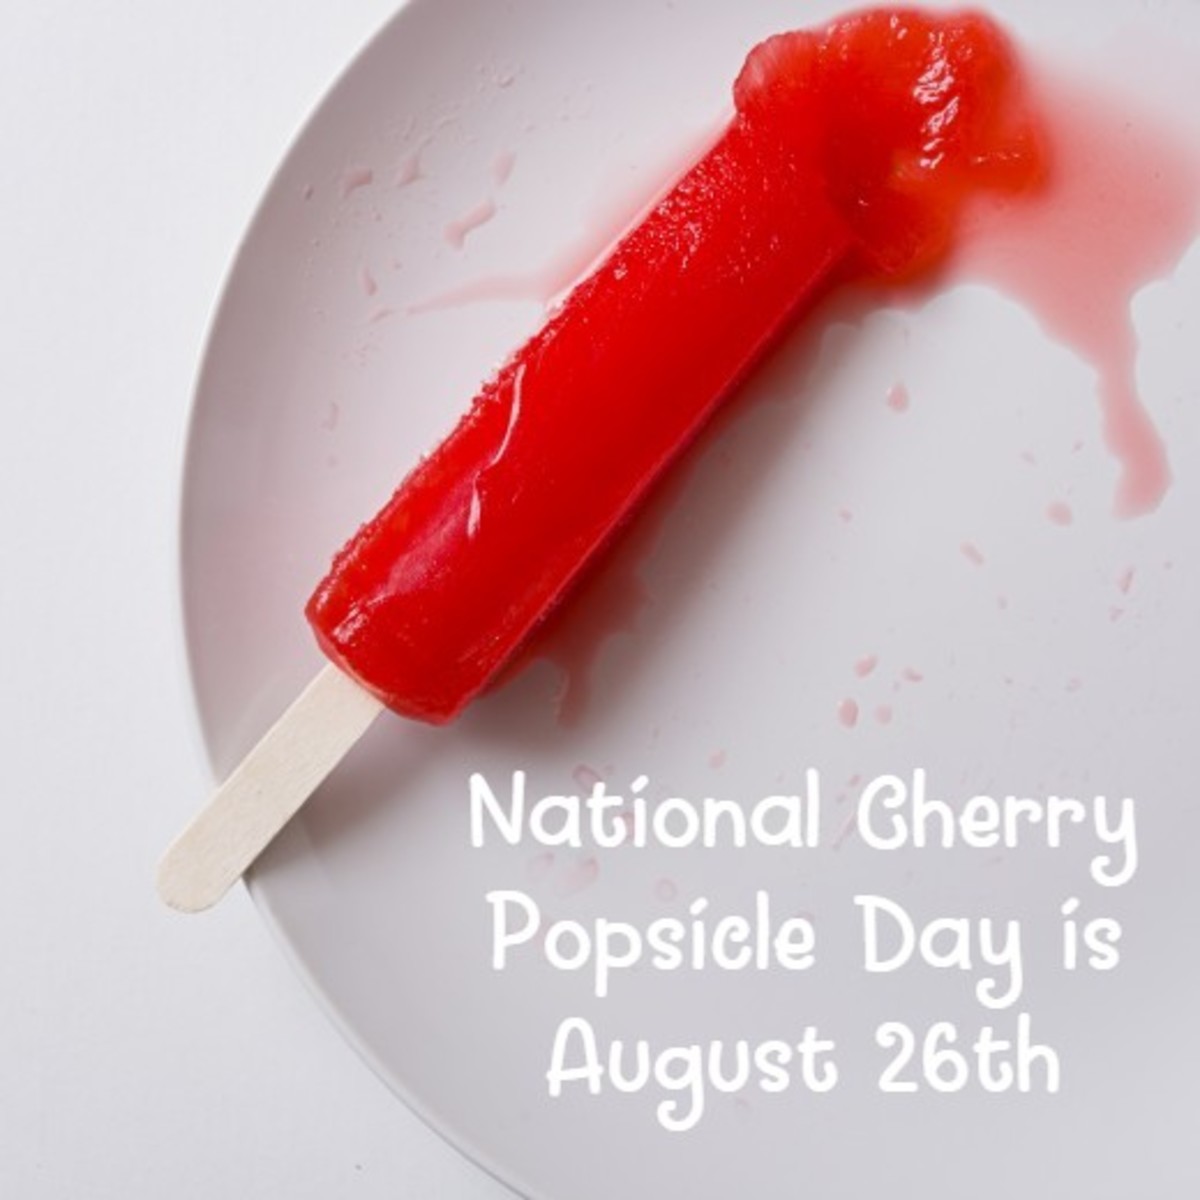 Cherry is one of the best selling of all popsicle flavors.